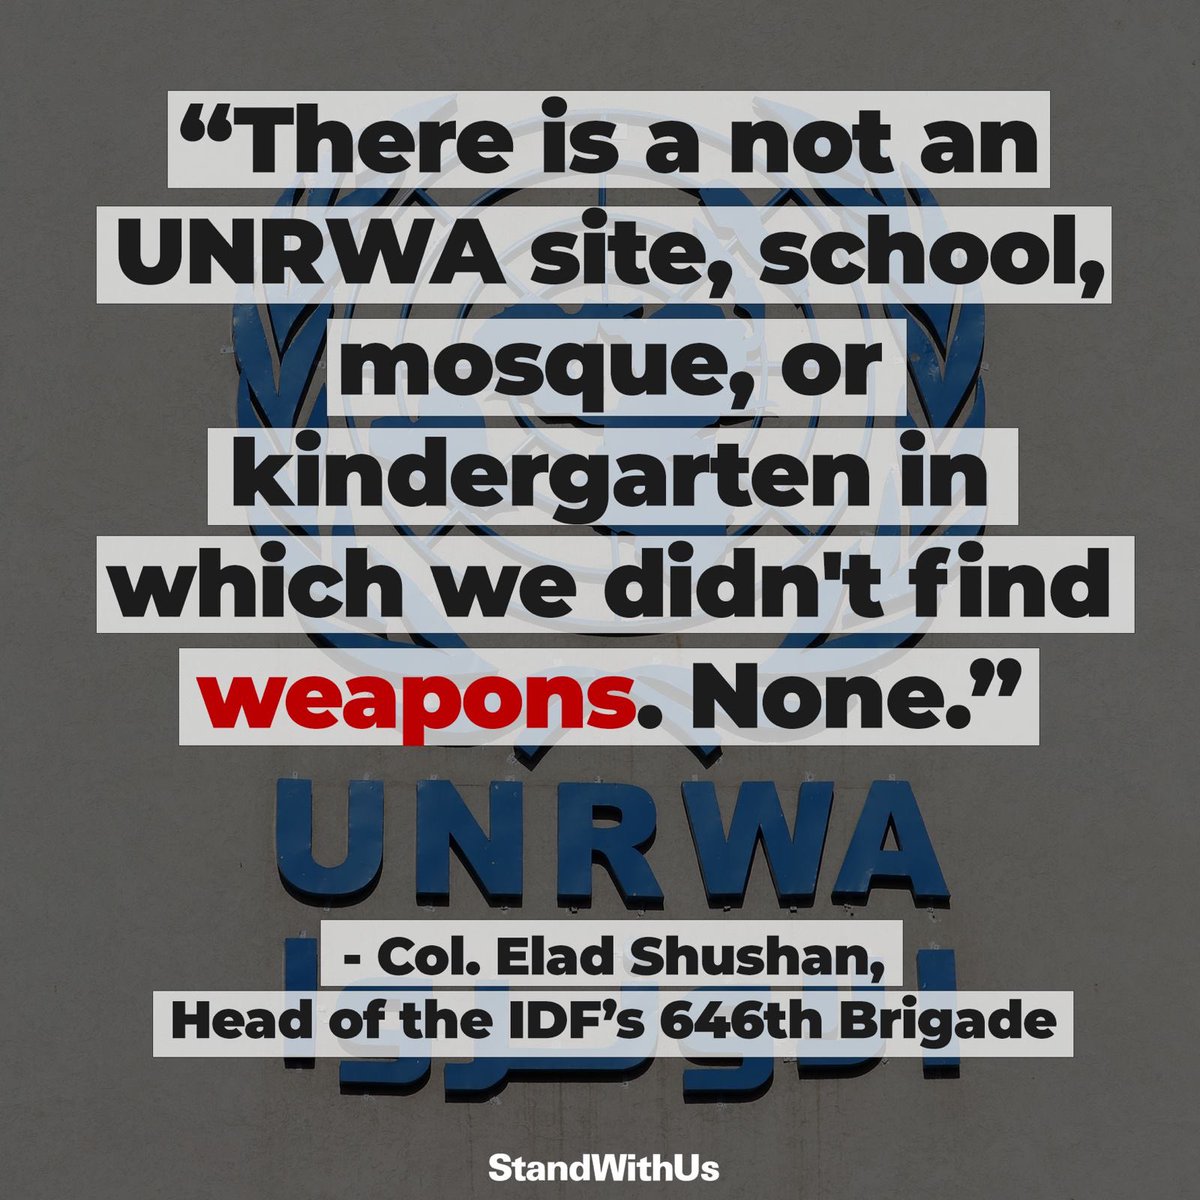 @EylonALevy 'We did not know'. They damn well knew, funded, and participated. Evil monsters must be prosecuted for Crimes Against Humanity.🤬
#DefundTheUN #DefundUNRWA 
#UNUNRWACrimes
#HamasCrimes